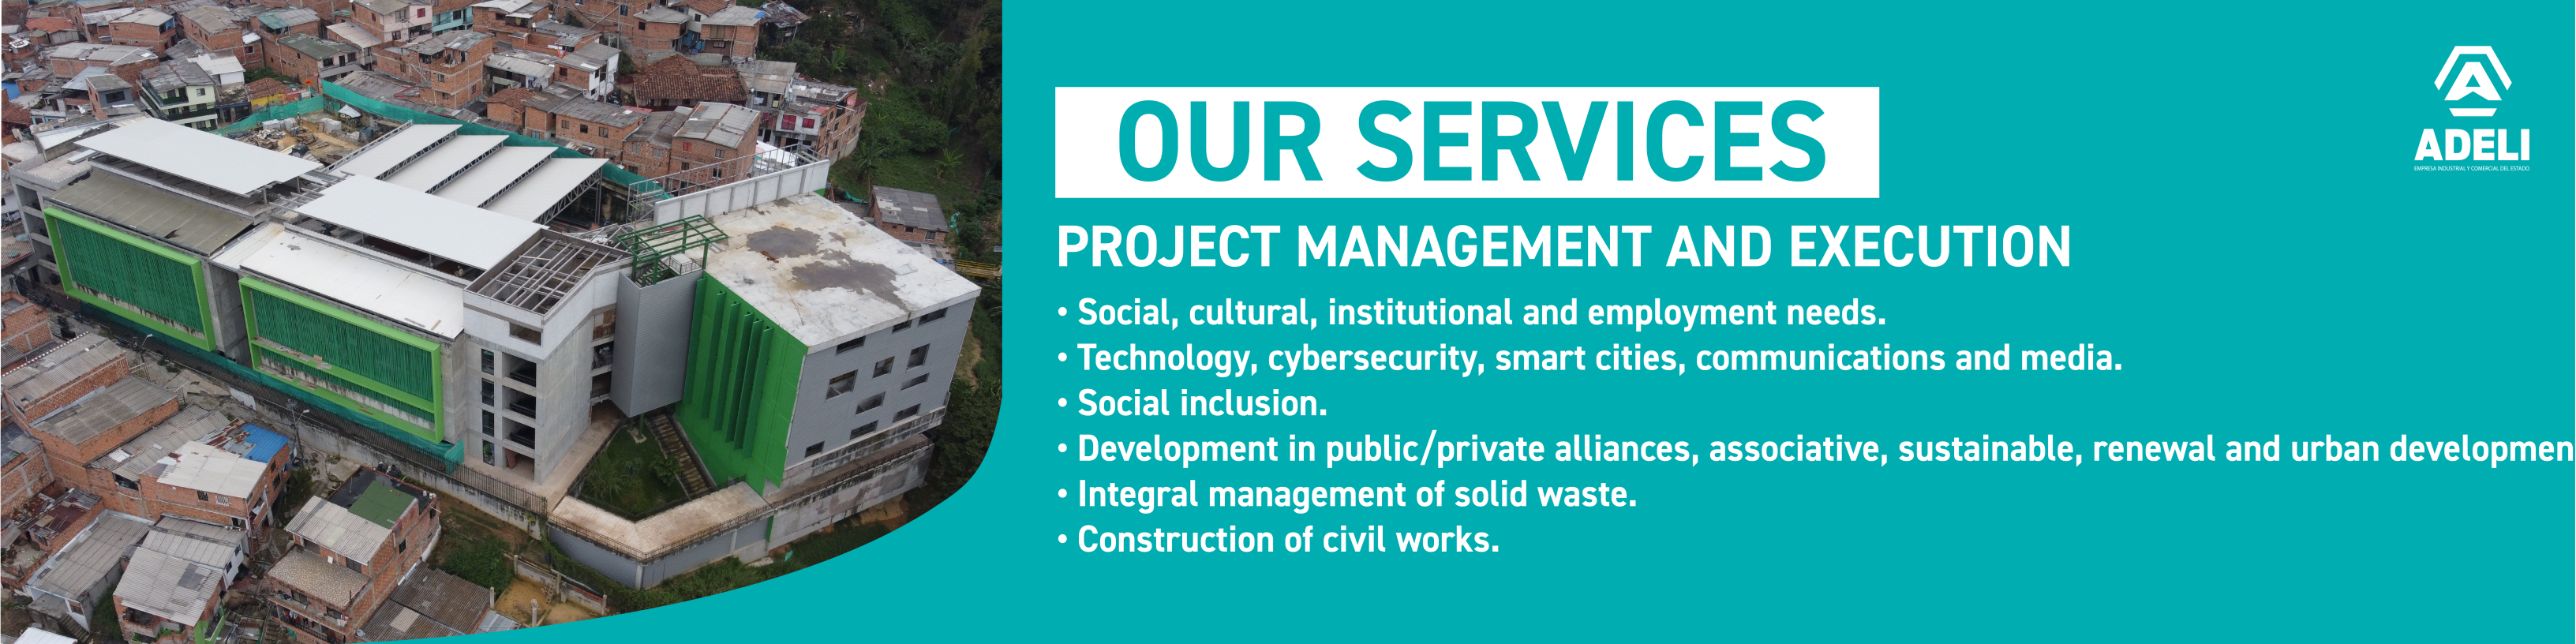 Our services: Project management and execution.